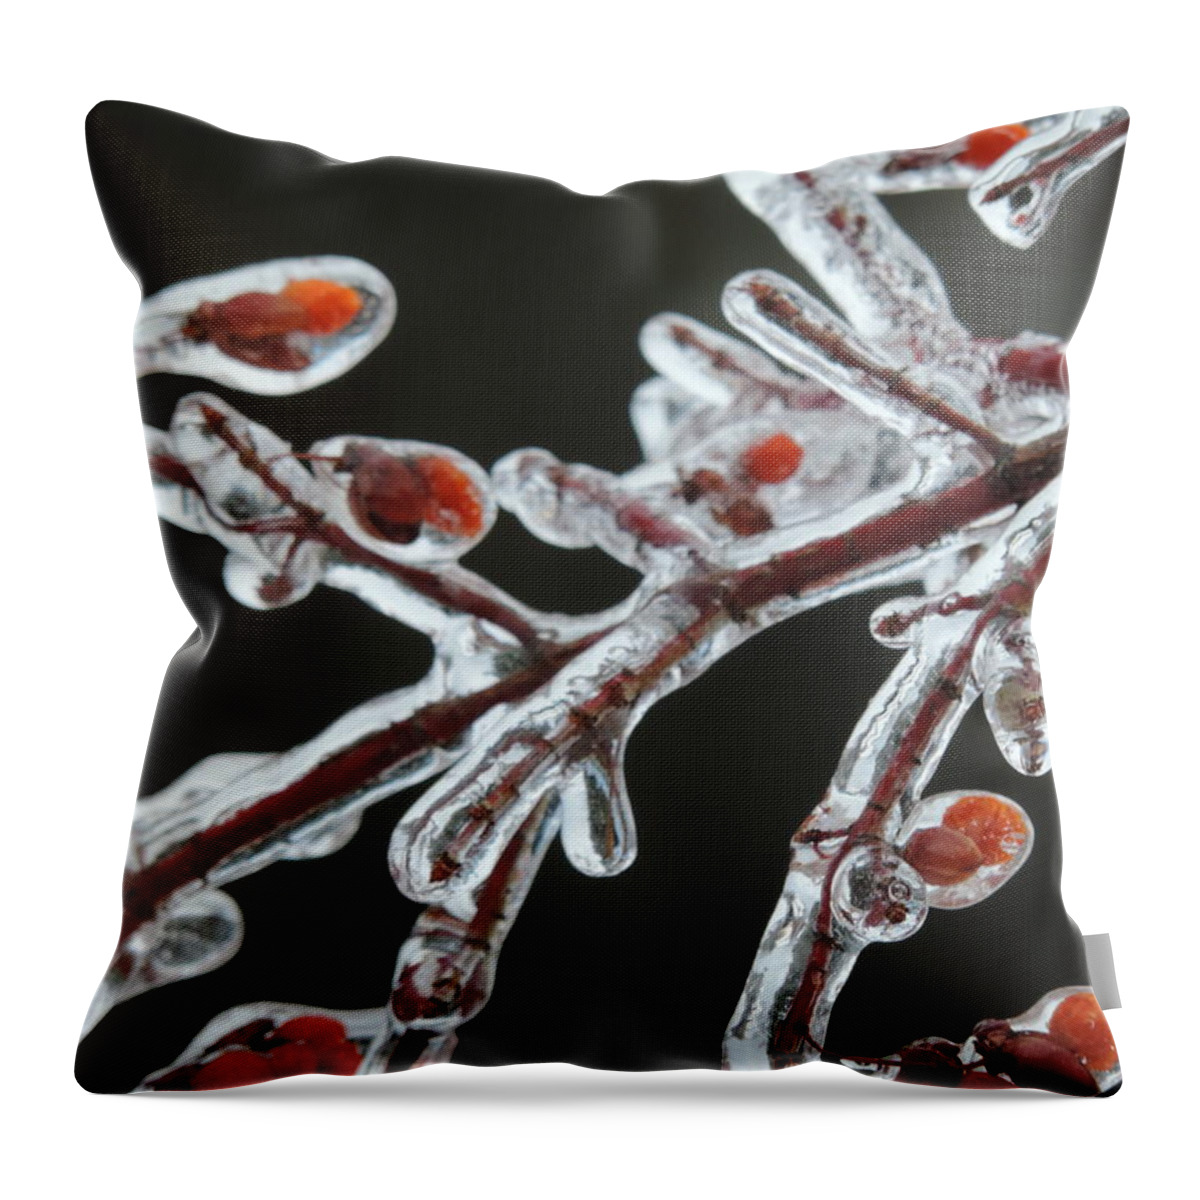 Red Throw Pillow featuring the photograph Frozen Red Berries by Bill Tomsa